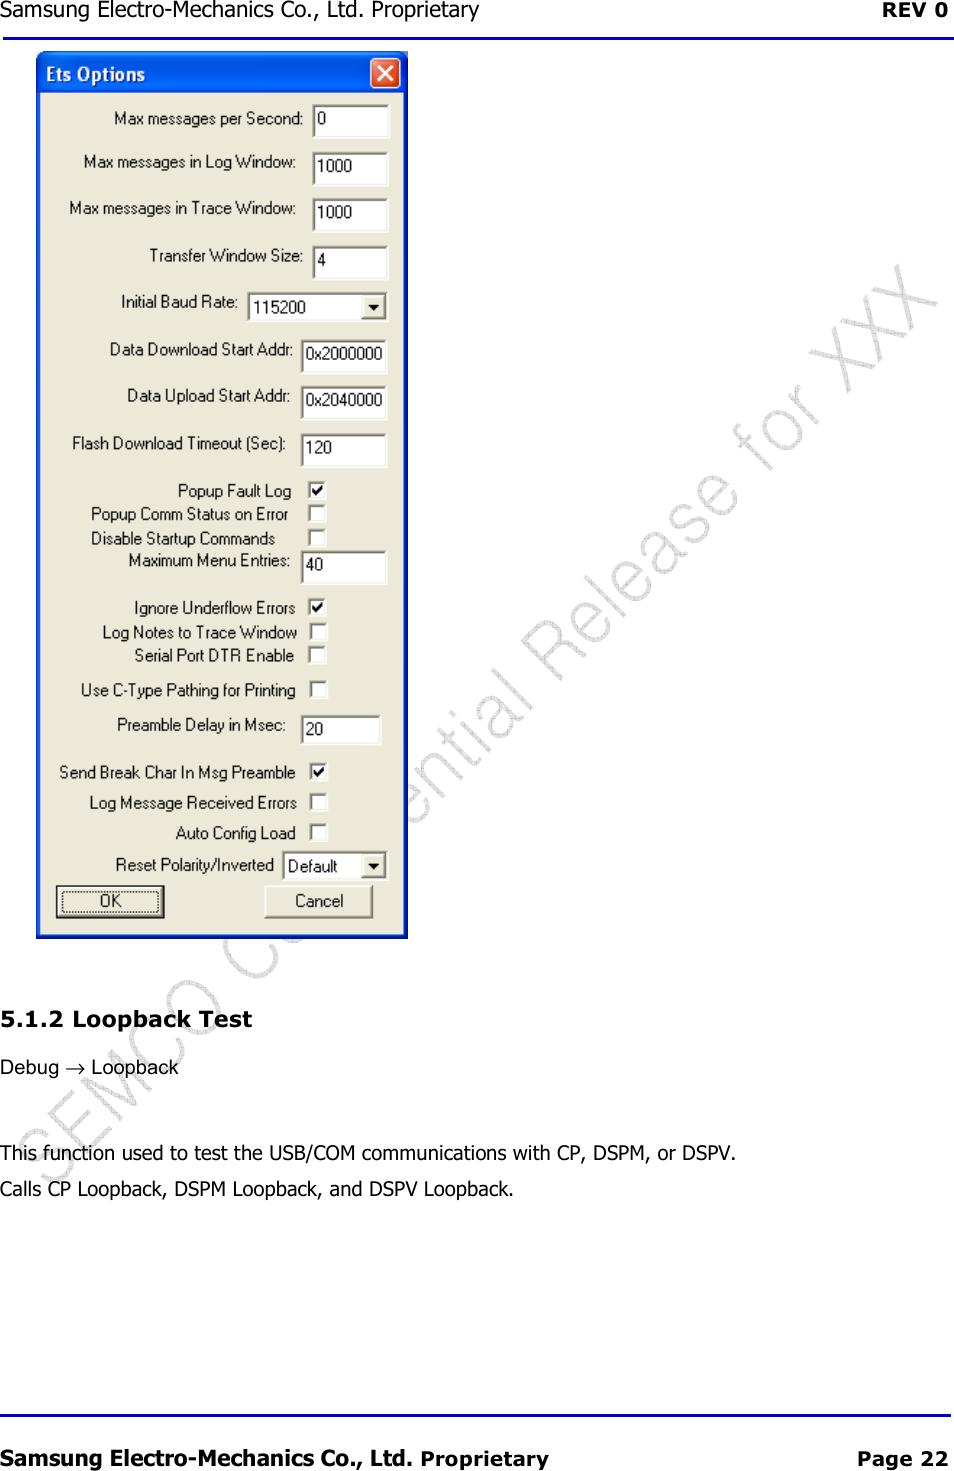 Samsung Electro-Mechanics Co., Ltd. Proprietary  REV 0 Samsung Electro-Mechanics Co., Ltd. Proprietary  Page 22  5.1.2  Loopback Test Debug → Loopback  This function used to test the USB/COM communications with CP, DSPM, or DSPV.  Calls CP Loopback, DSPM Loopback, and DSPV Loopback. 